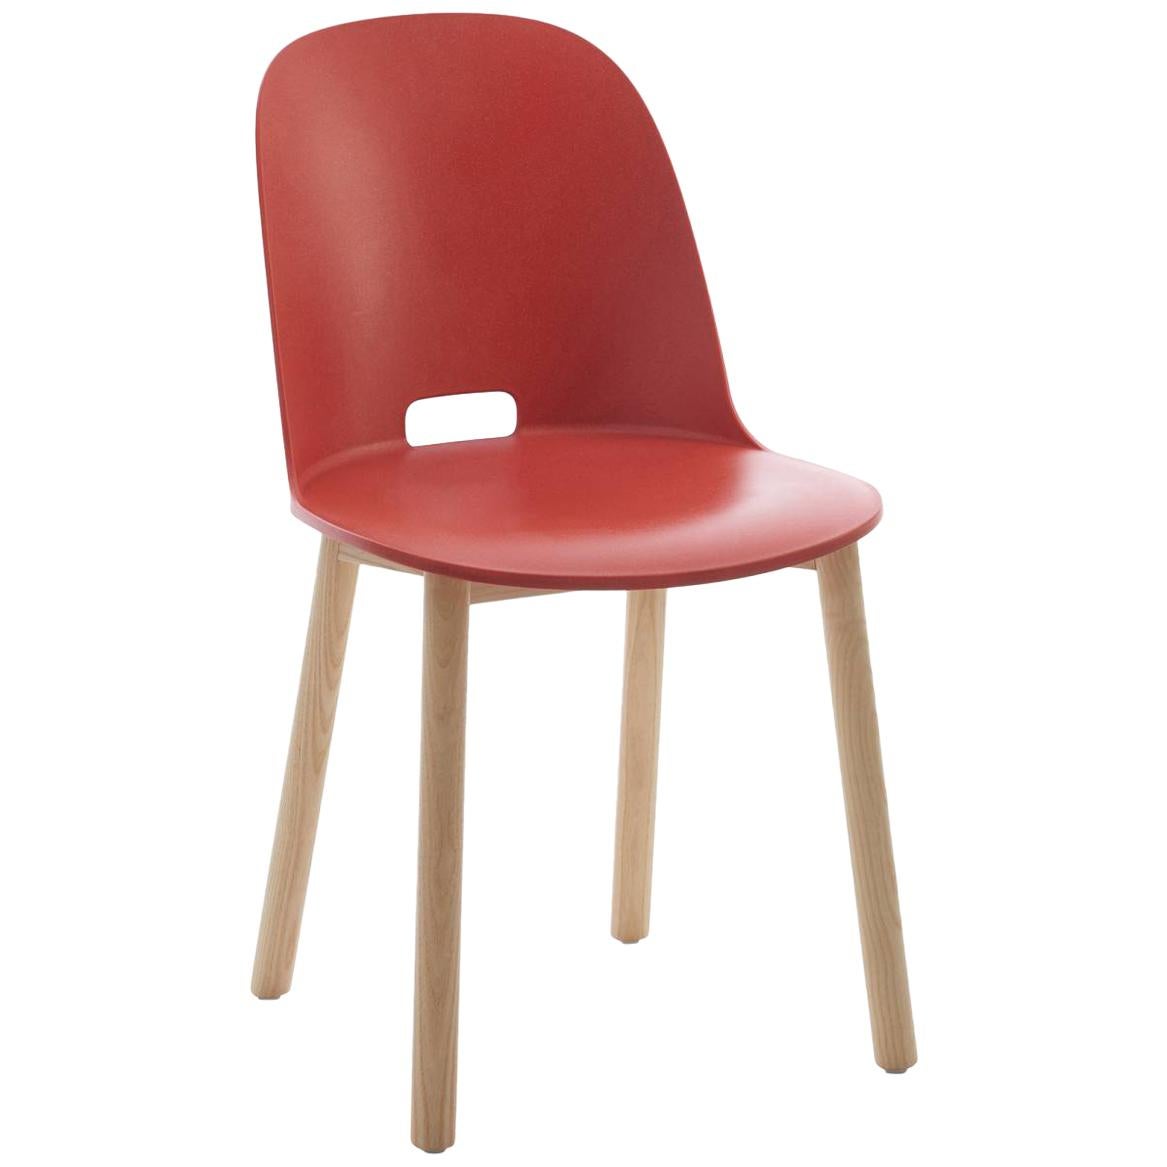 Emeco Alfi Chair in Red and Ash with High Back by Jasper Morrison